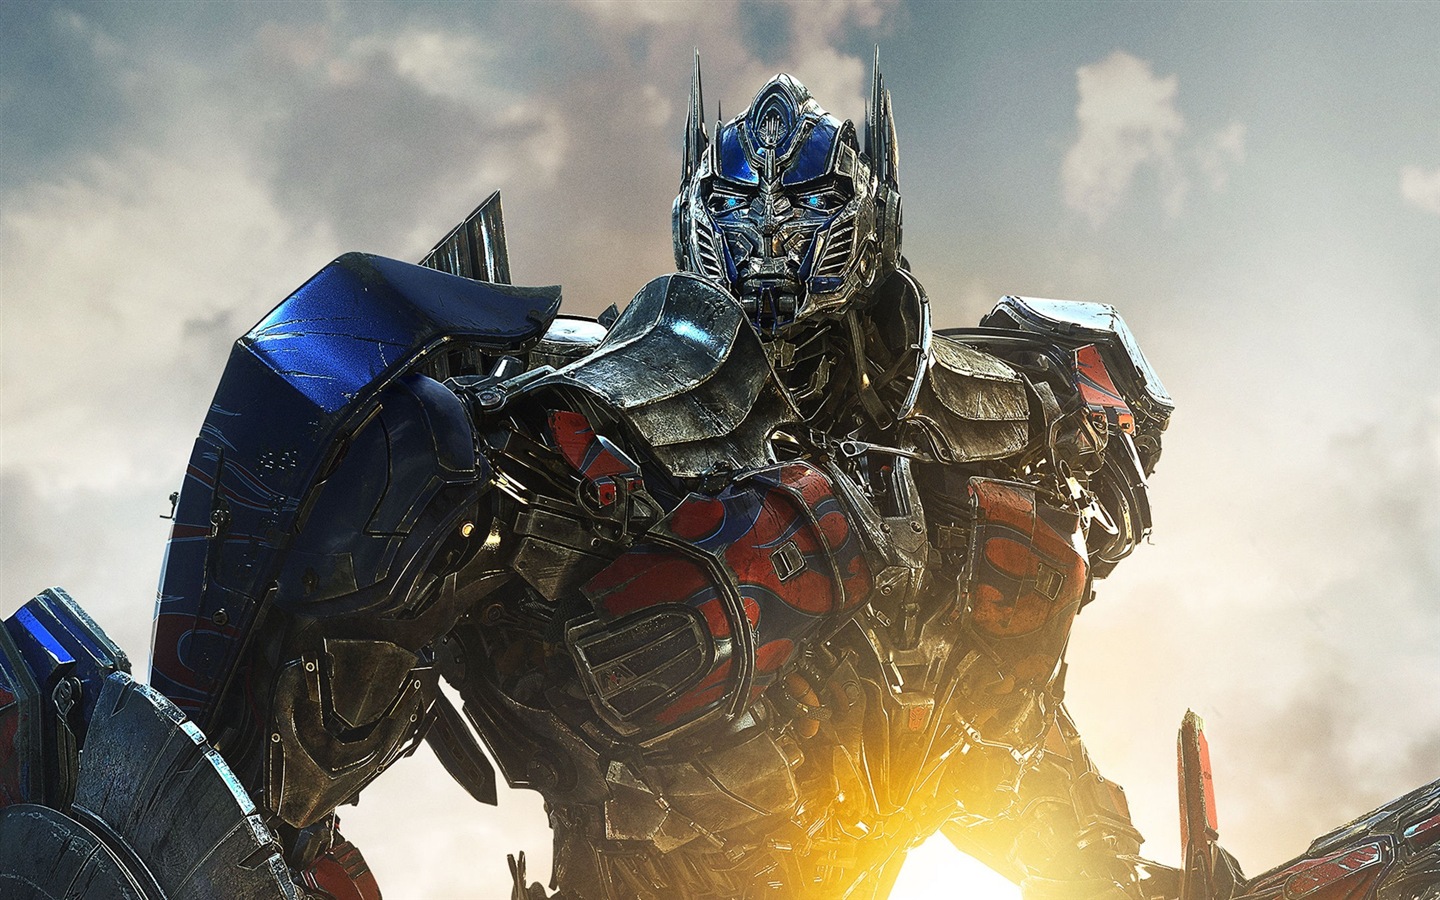 2014 Transformers: Age of Extinction HD wallpapers #2 - 1440x900